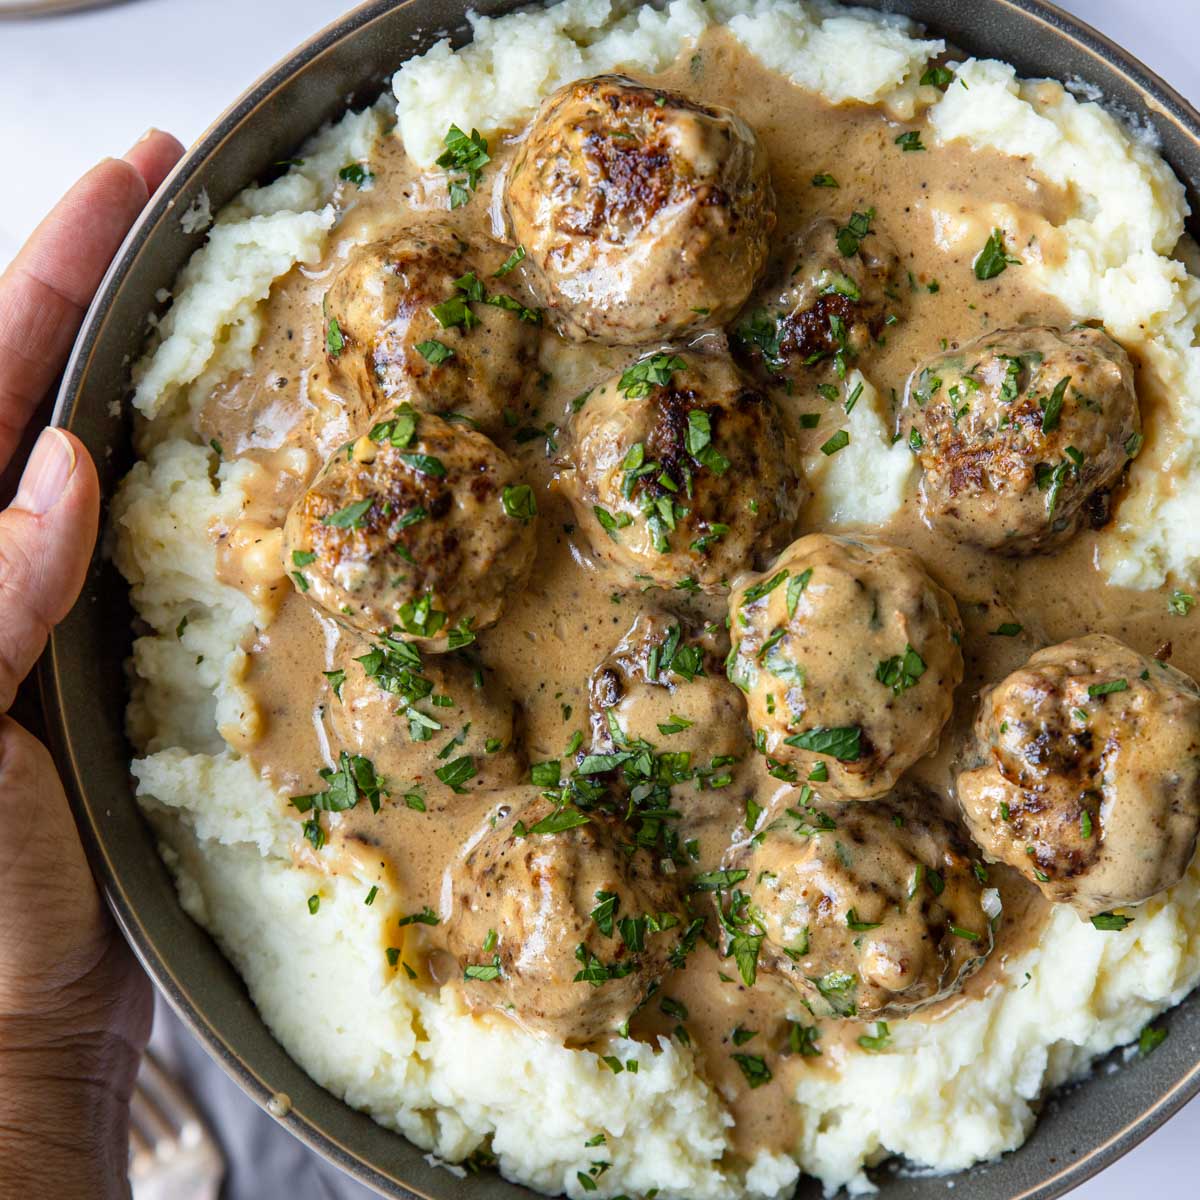 Mom's Swedish Meatballs - Served From Scratch